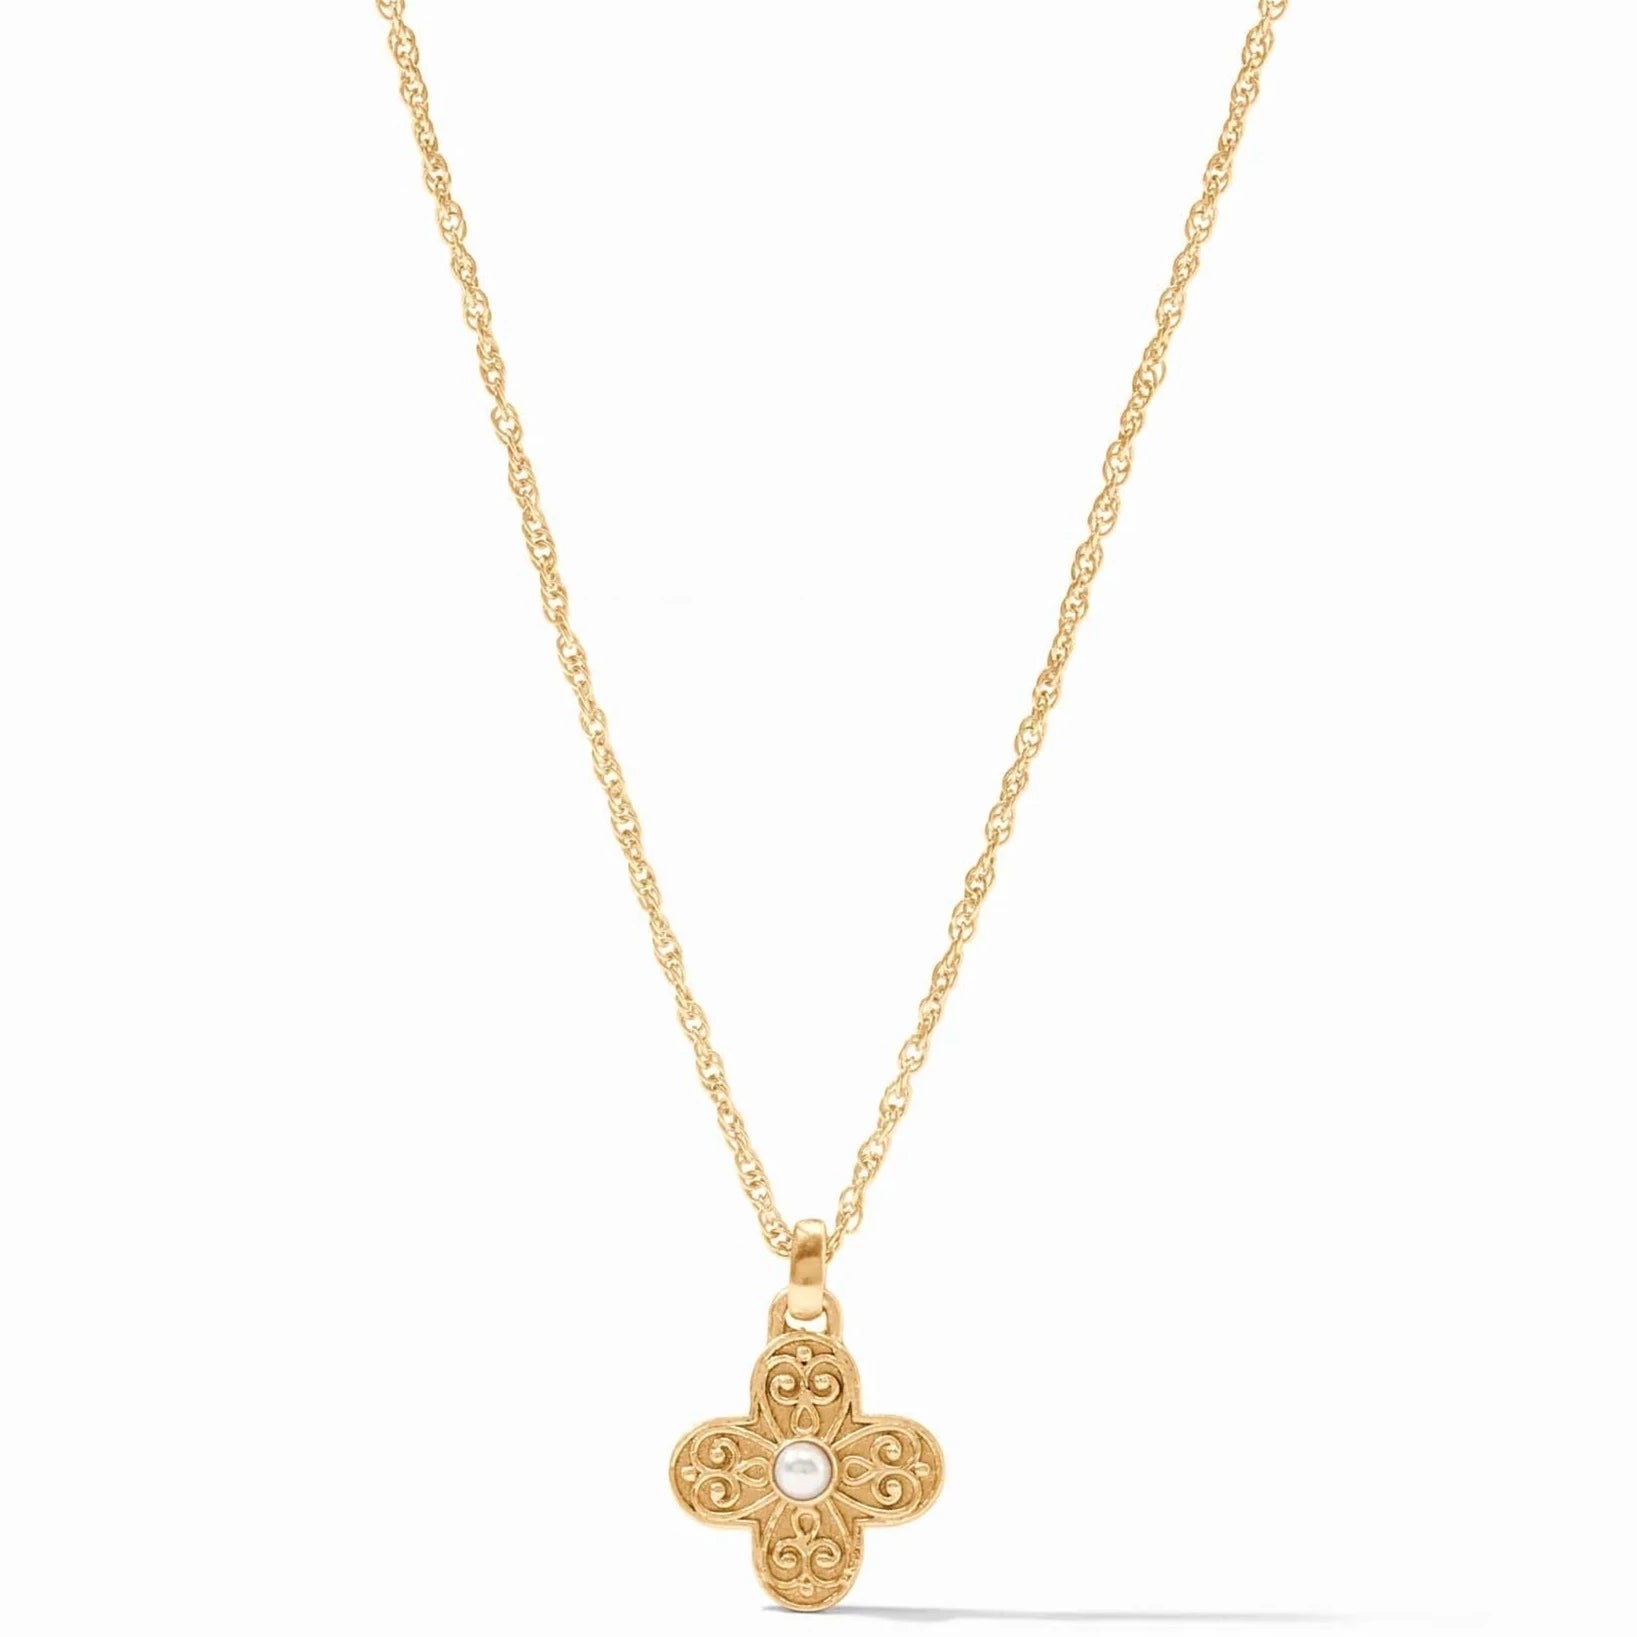 Julie Vos 24K Gold Plated Corinth Delicate Necklace